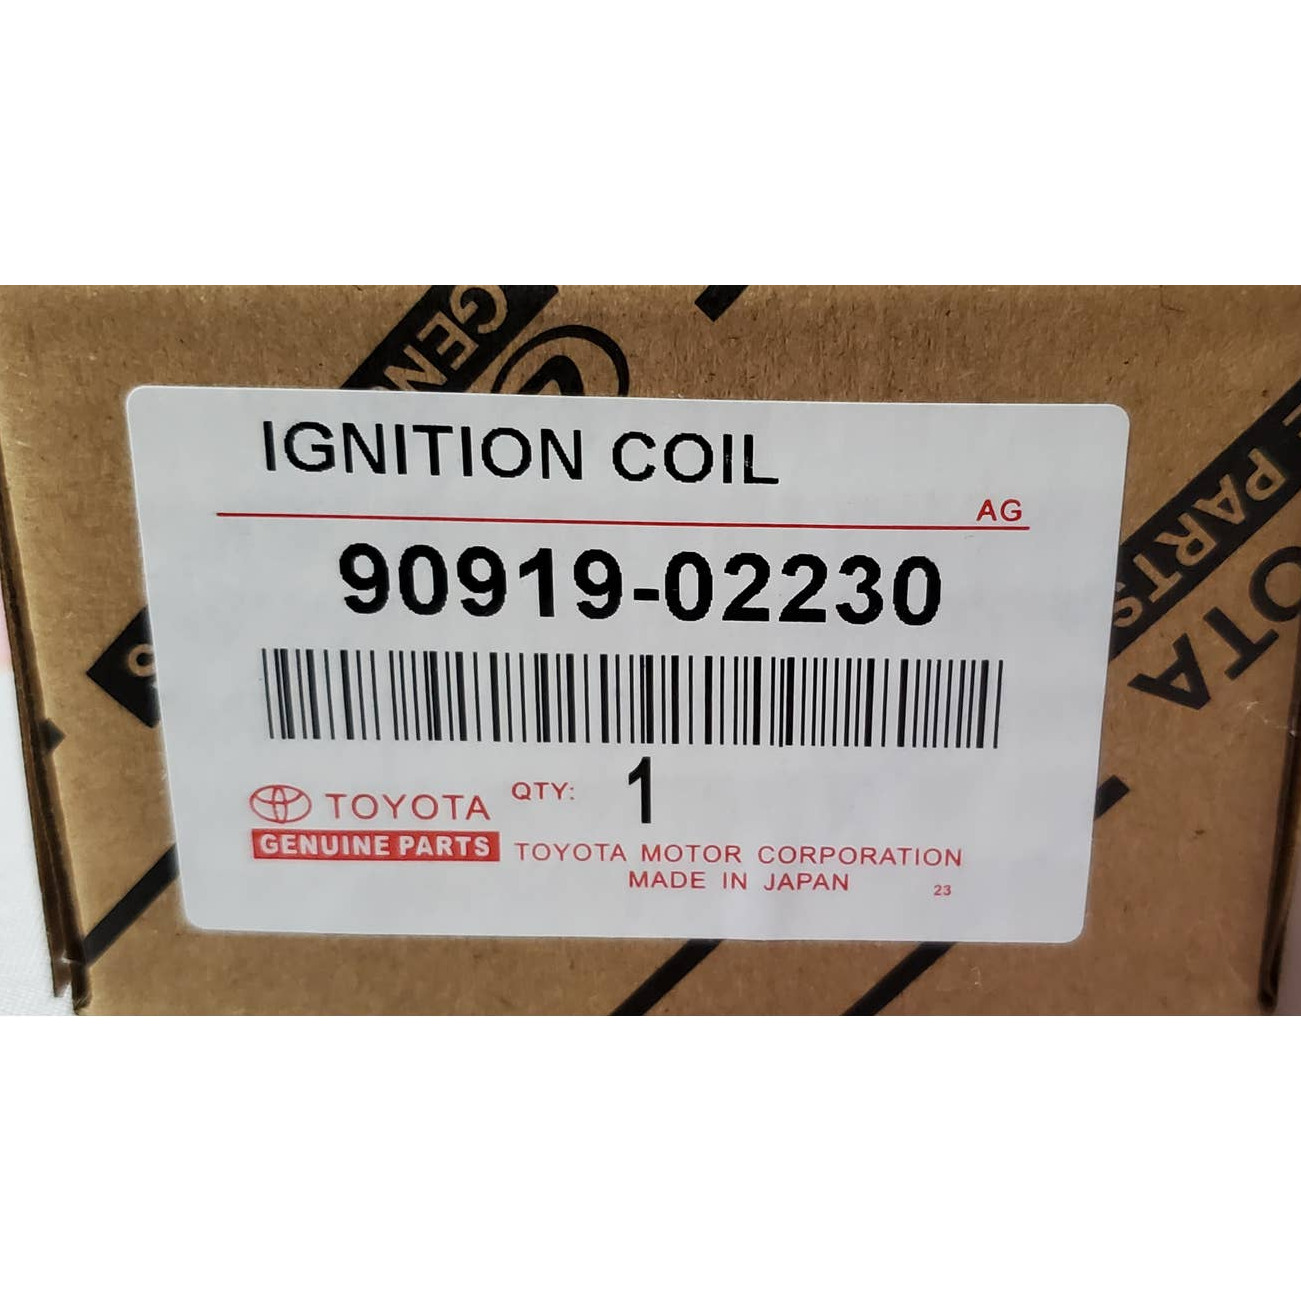 Original Toyota Ignition Coil - Part Number: 9091902230